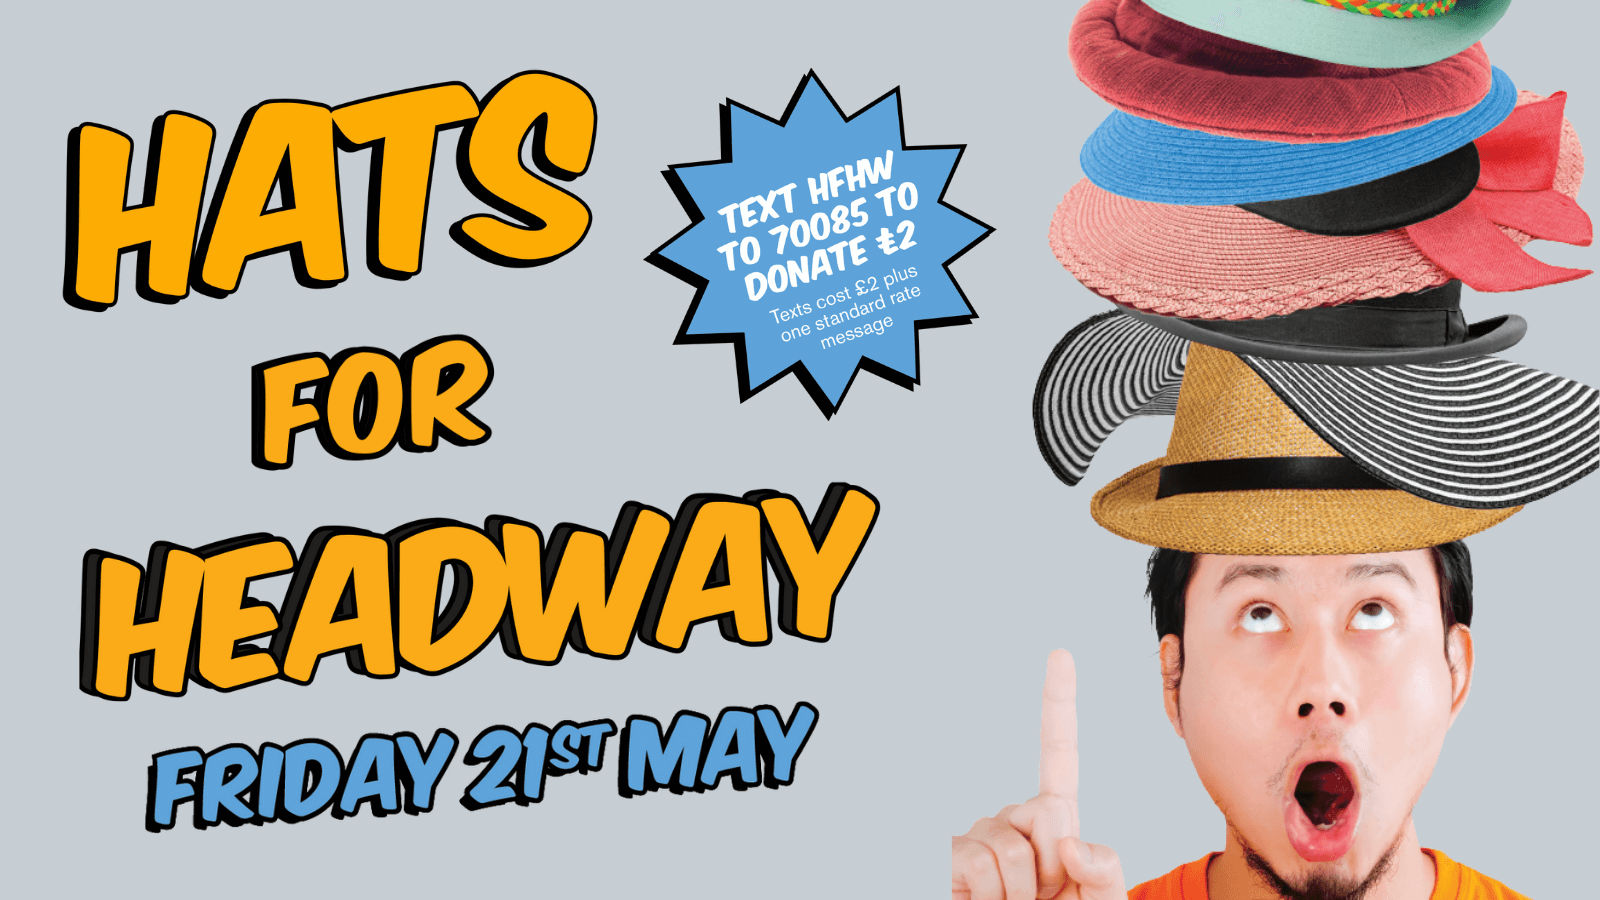 Hats for Headway campaign